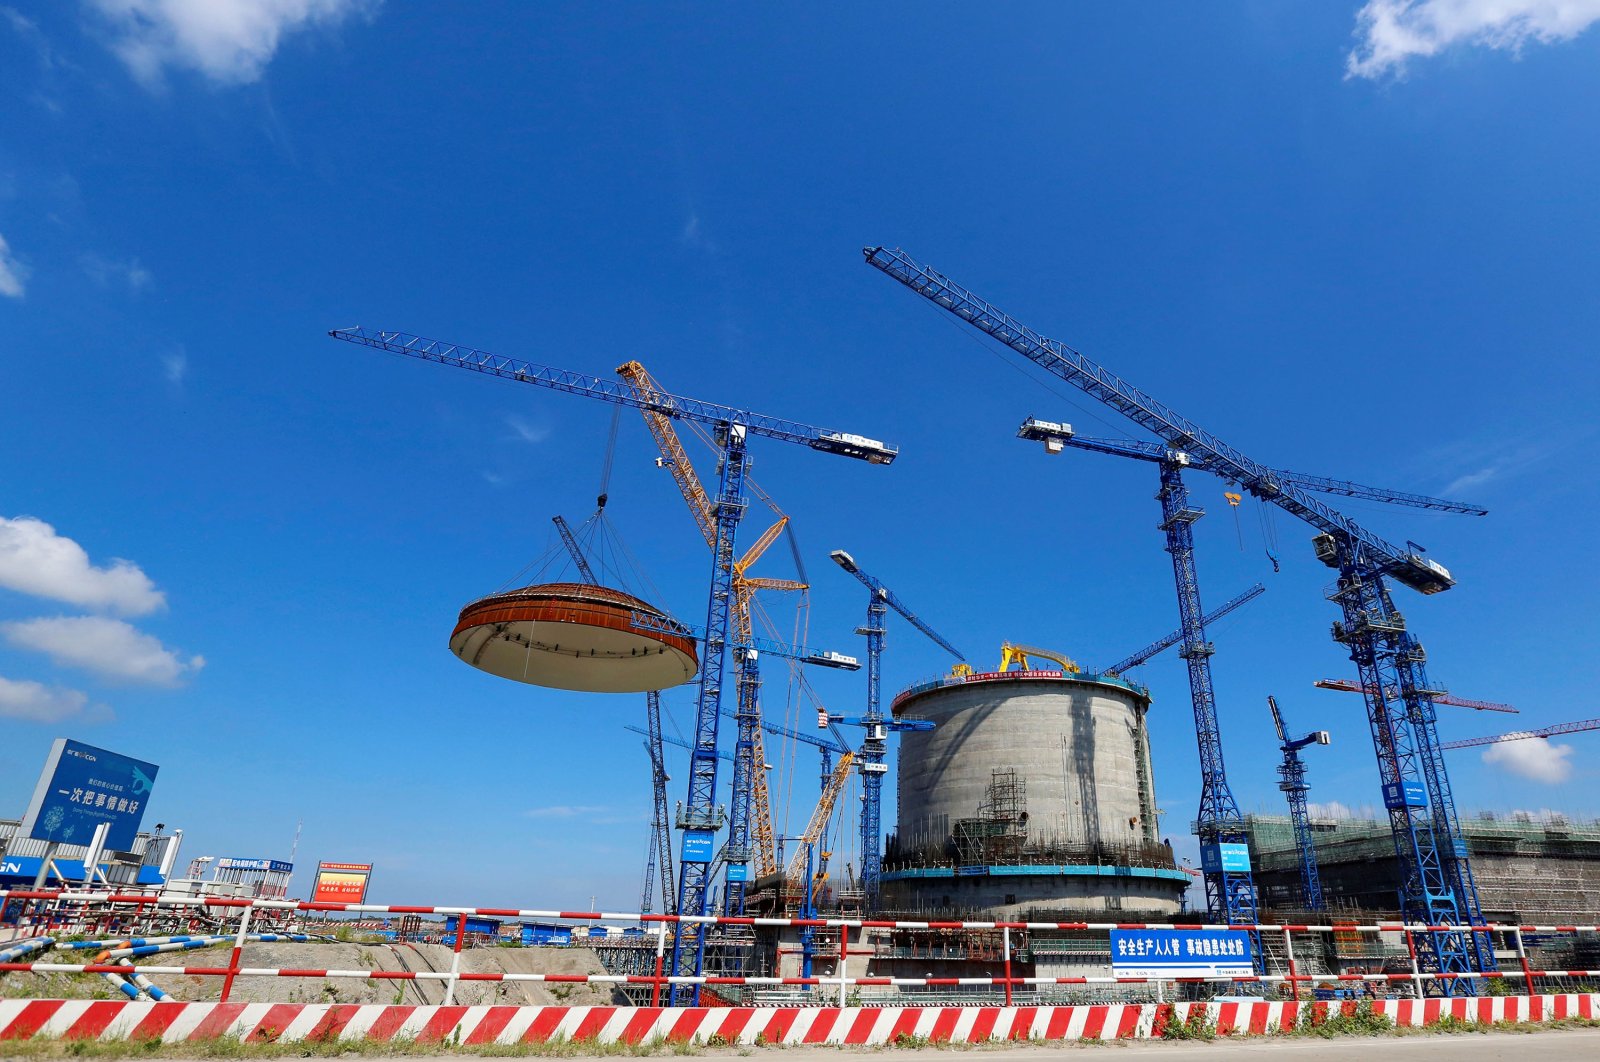 A dome is installed over a Hualong One nuclear power unit at Fangchenggang nuclear power plant in Guangxi Zhuang Autonomous Region, China, May 23, 2018. (Reuters Photo)